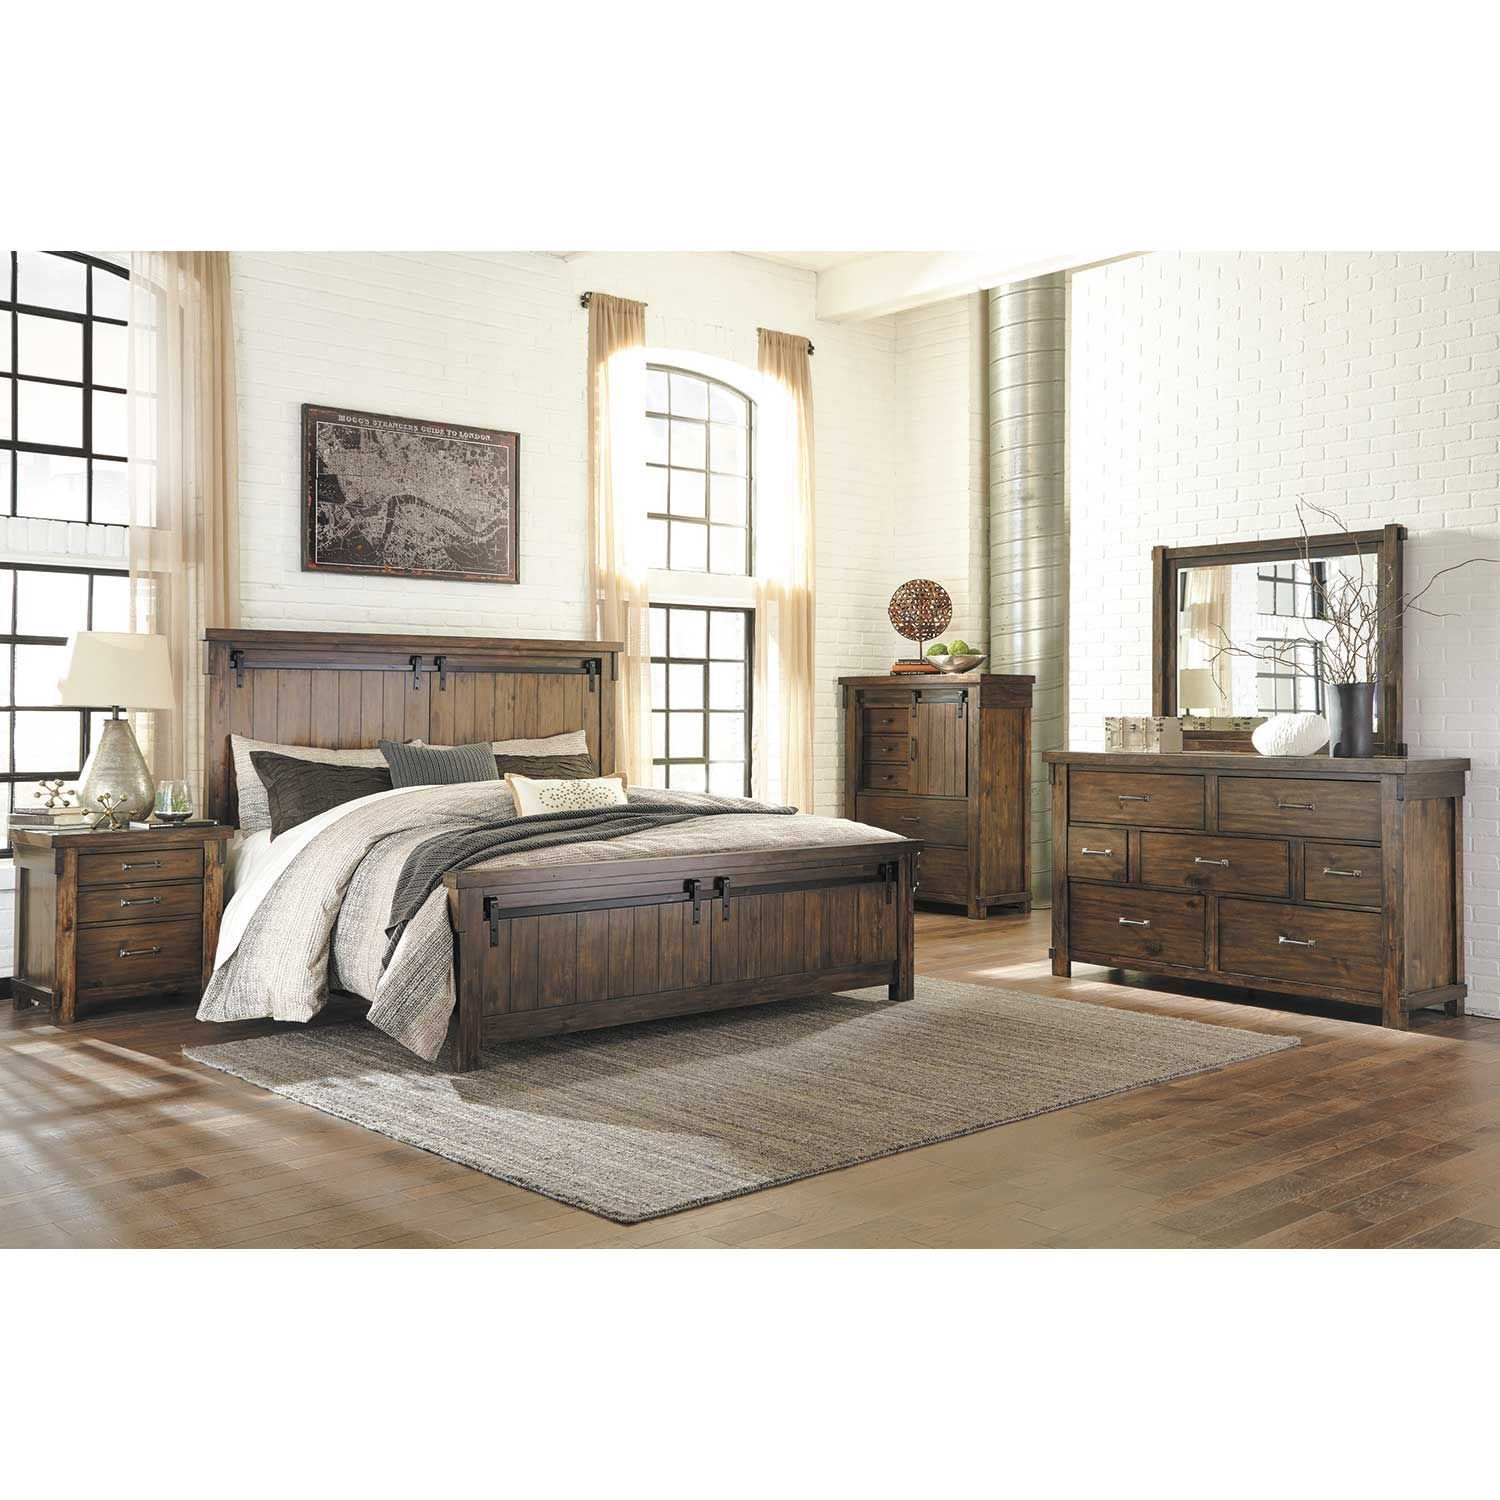 Lakeleigh 5 Piece Bedroom Set pertaining to dimensions 1500 X 1500